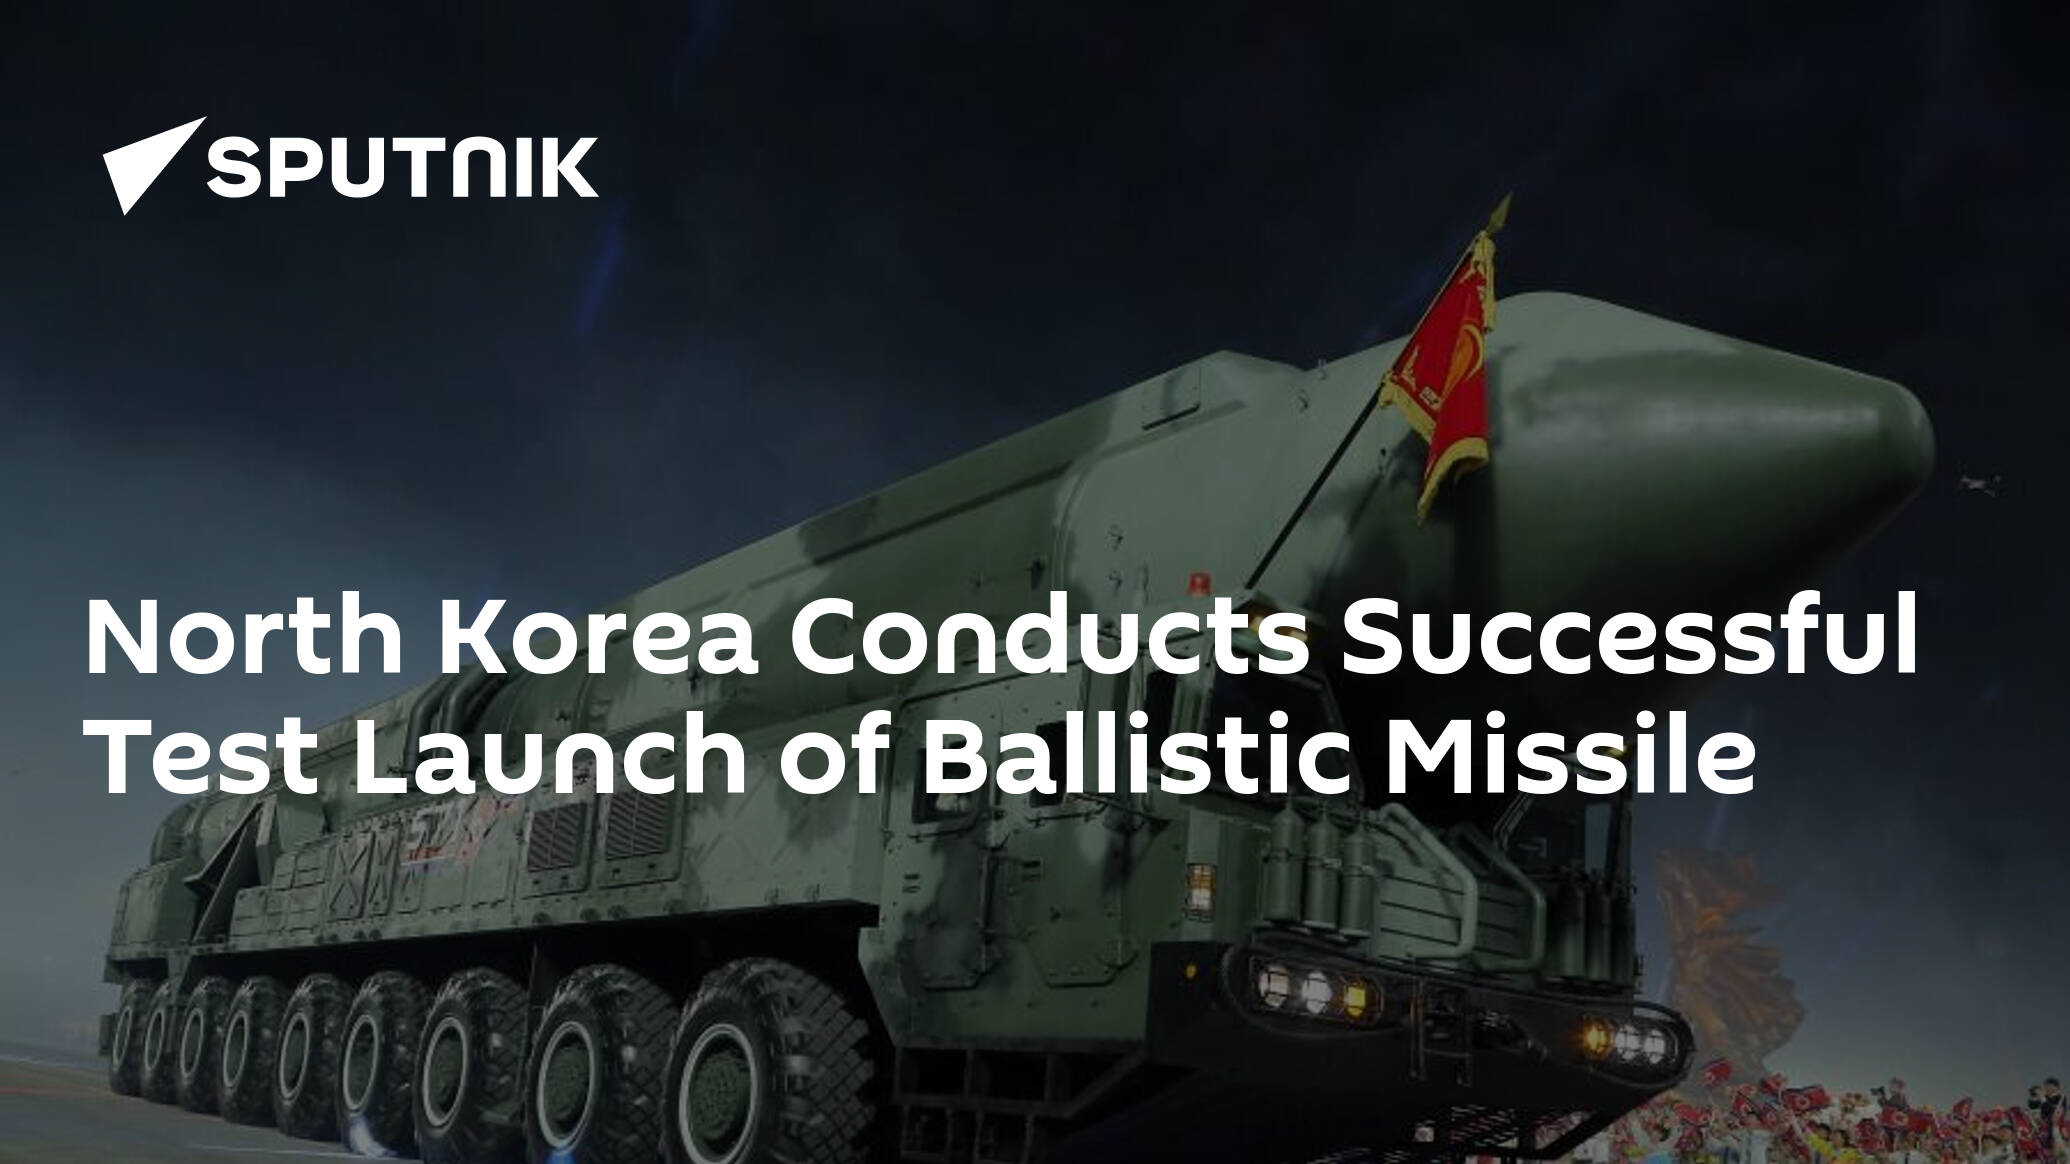 North Korea Conducts Successful Test Launch of Ballistic Missile